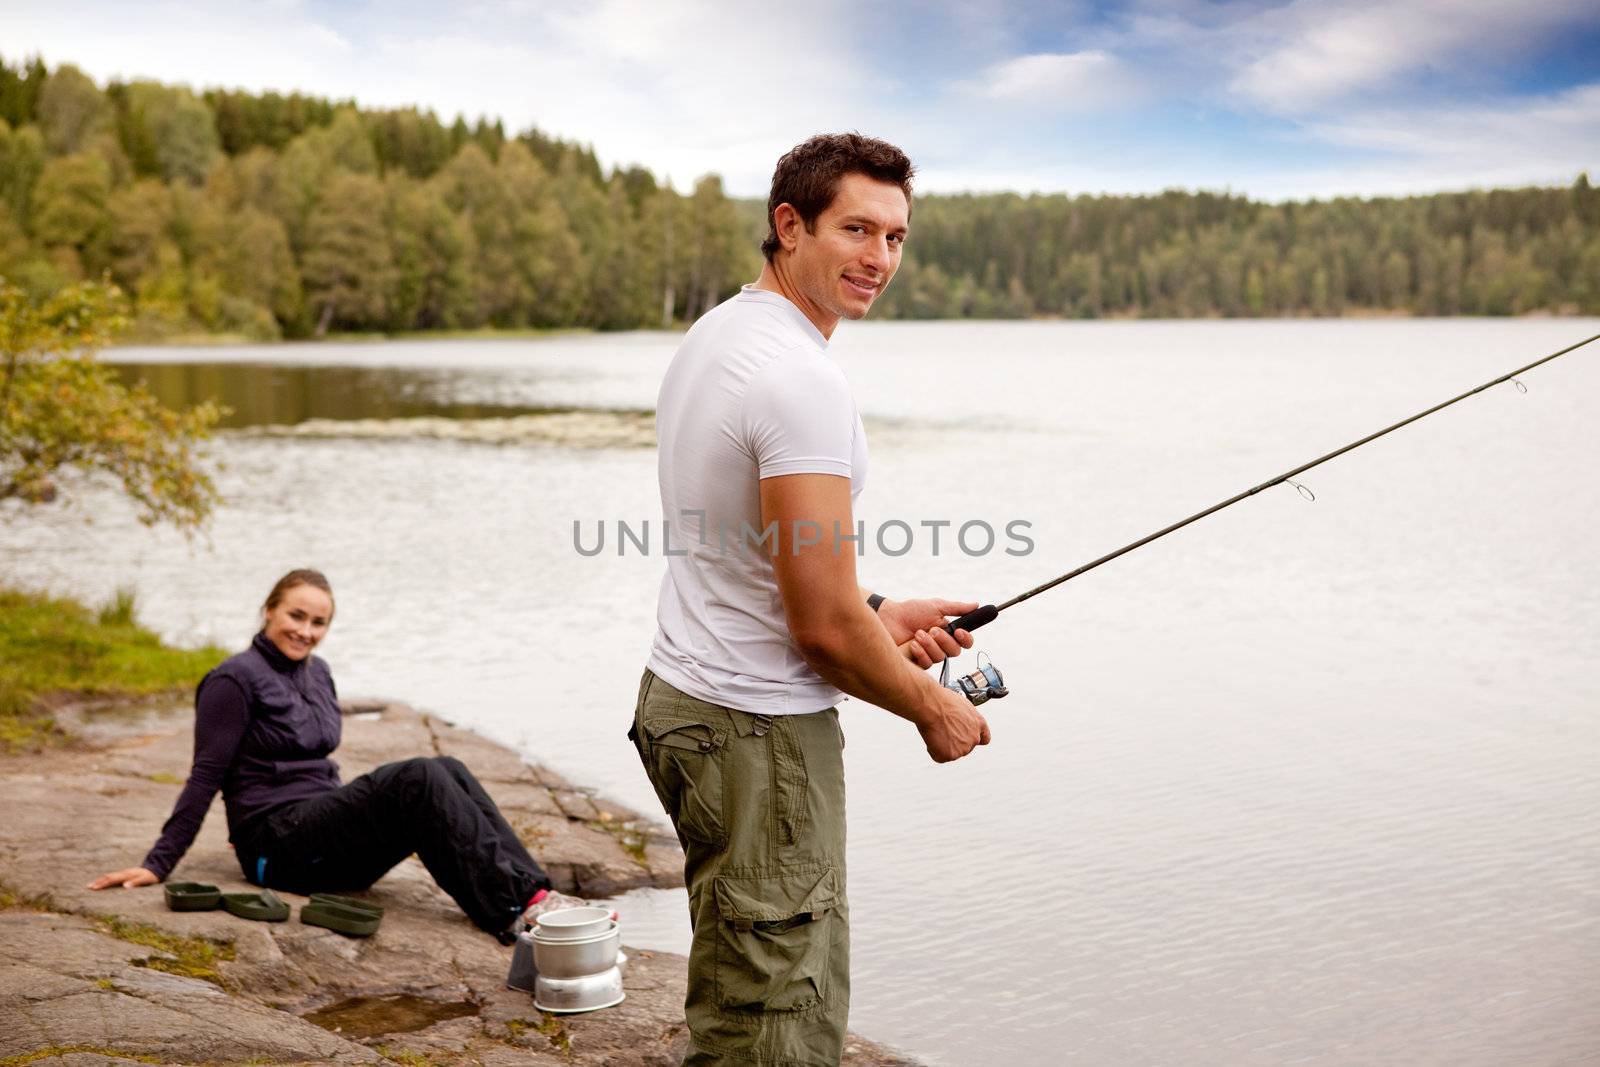 Fishing on Camping Trip by leaf